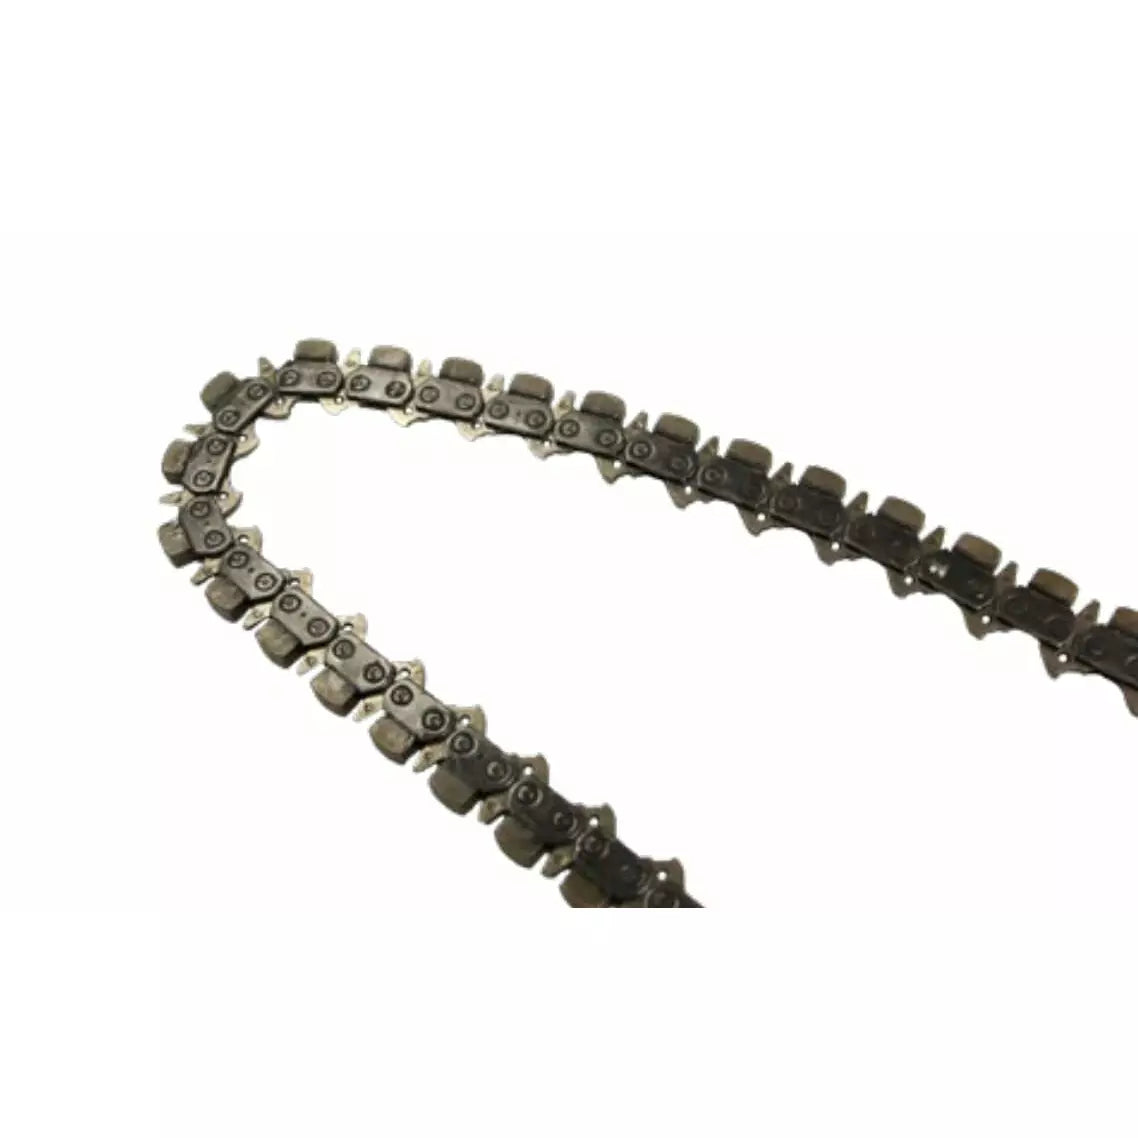 DCCC5013PG 12in. Chain for CSE12 Concrete Chain Saw